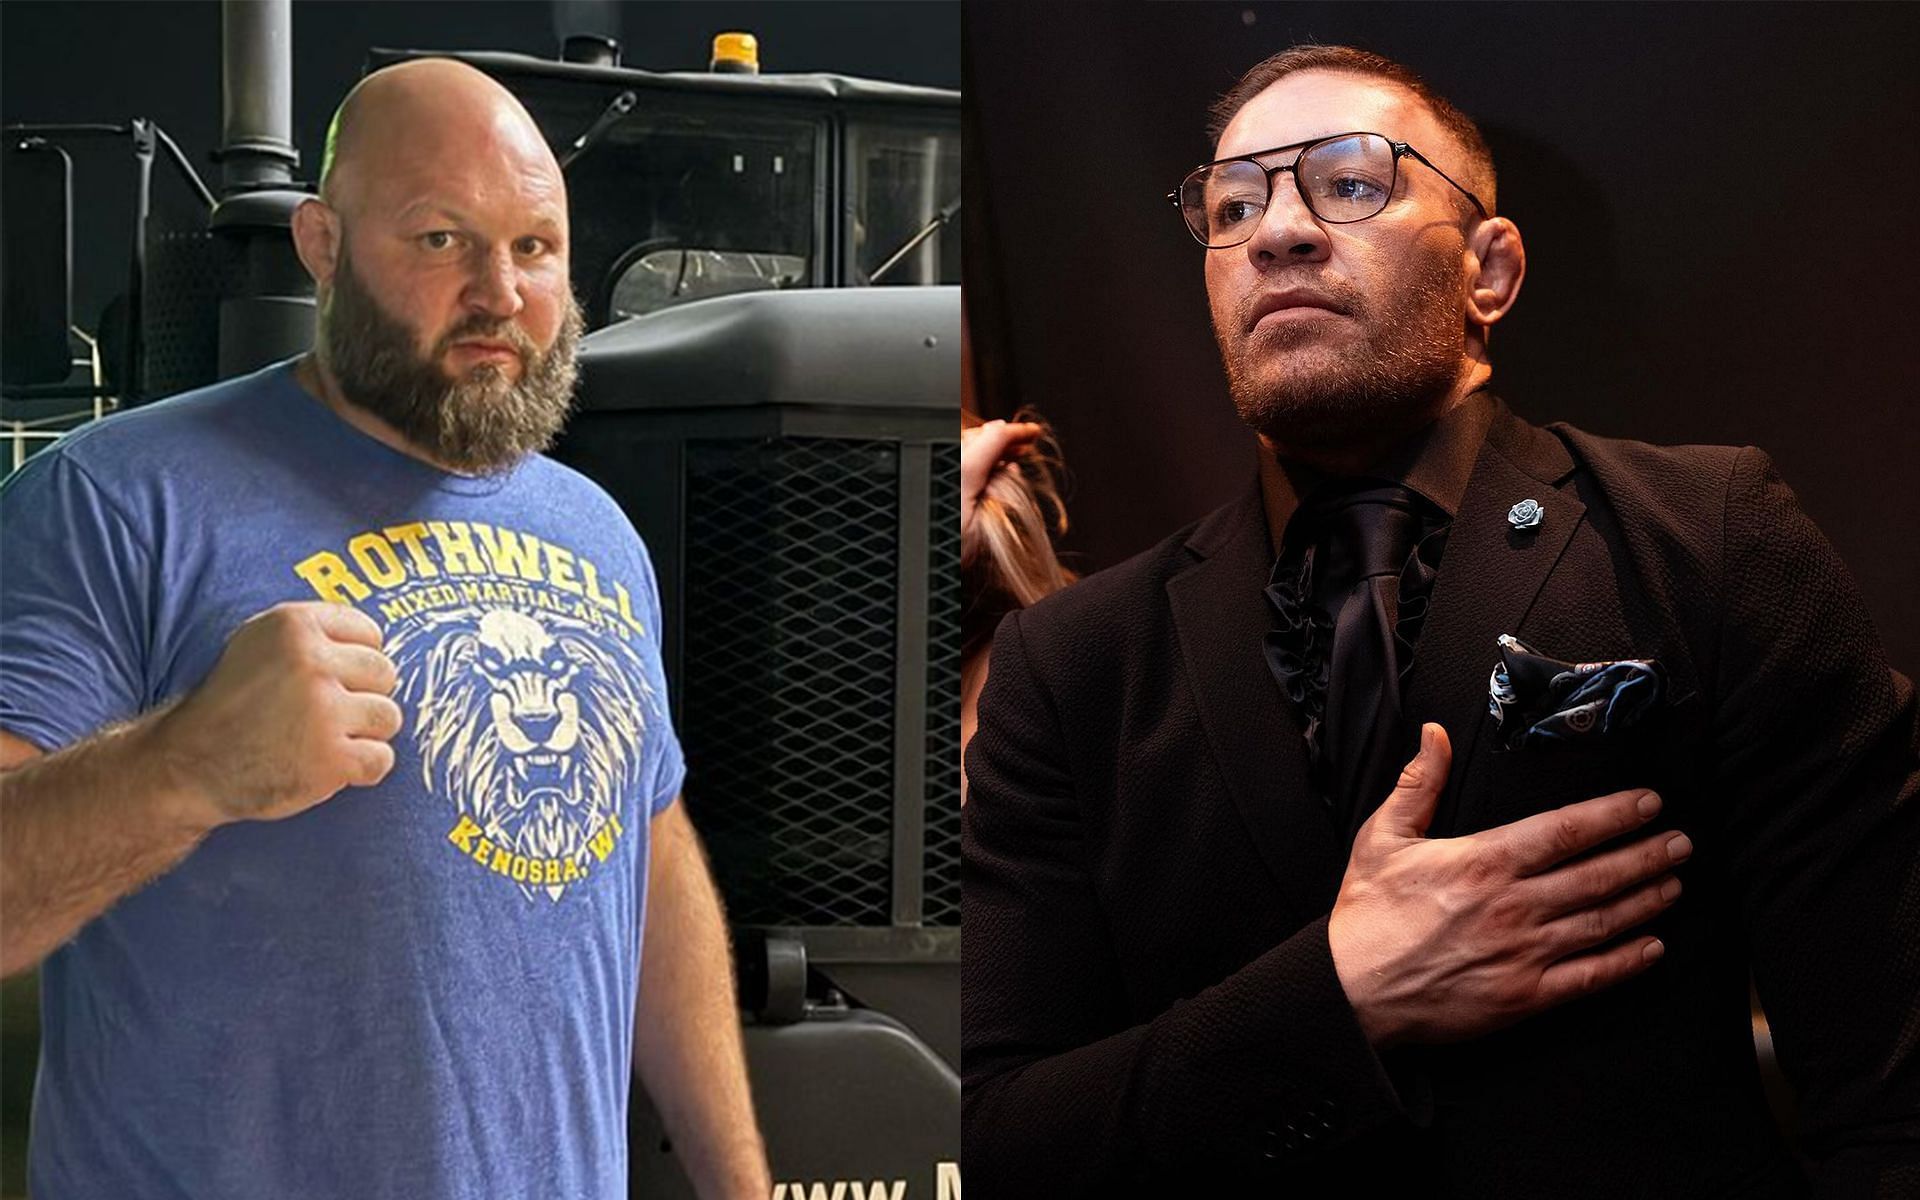 Ben Rothwell (left) is excited to witness the new chapter of BKFC after Conor McGregor (right) acquired a stake in the promotion [Images Courtesy: @rothwellfighter and @thenotoriousmma Instagram]